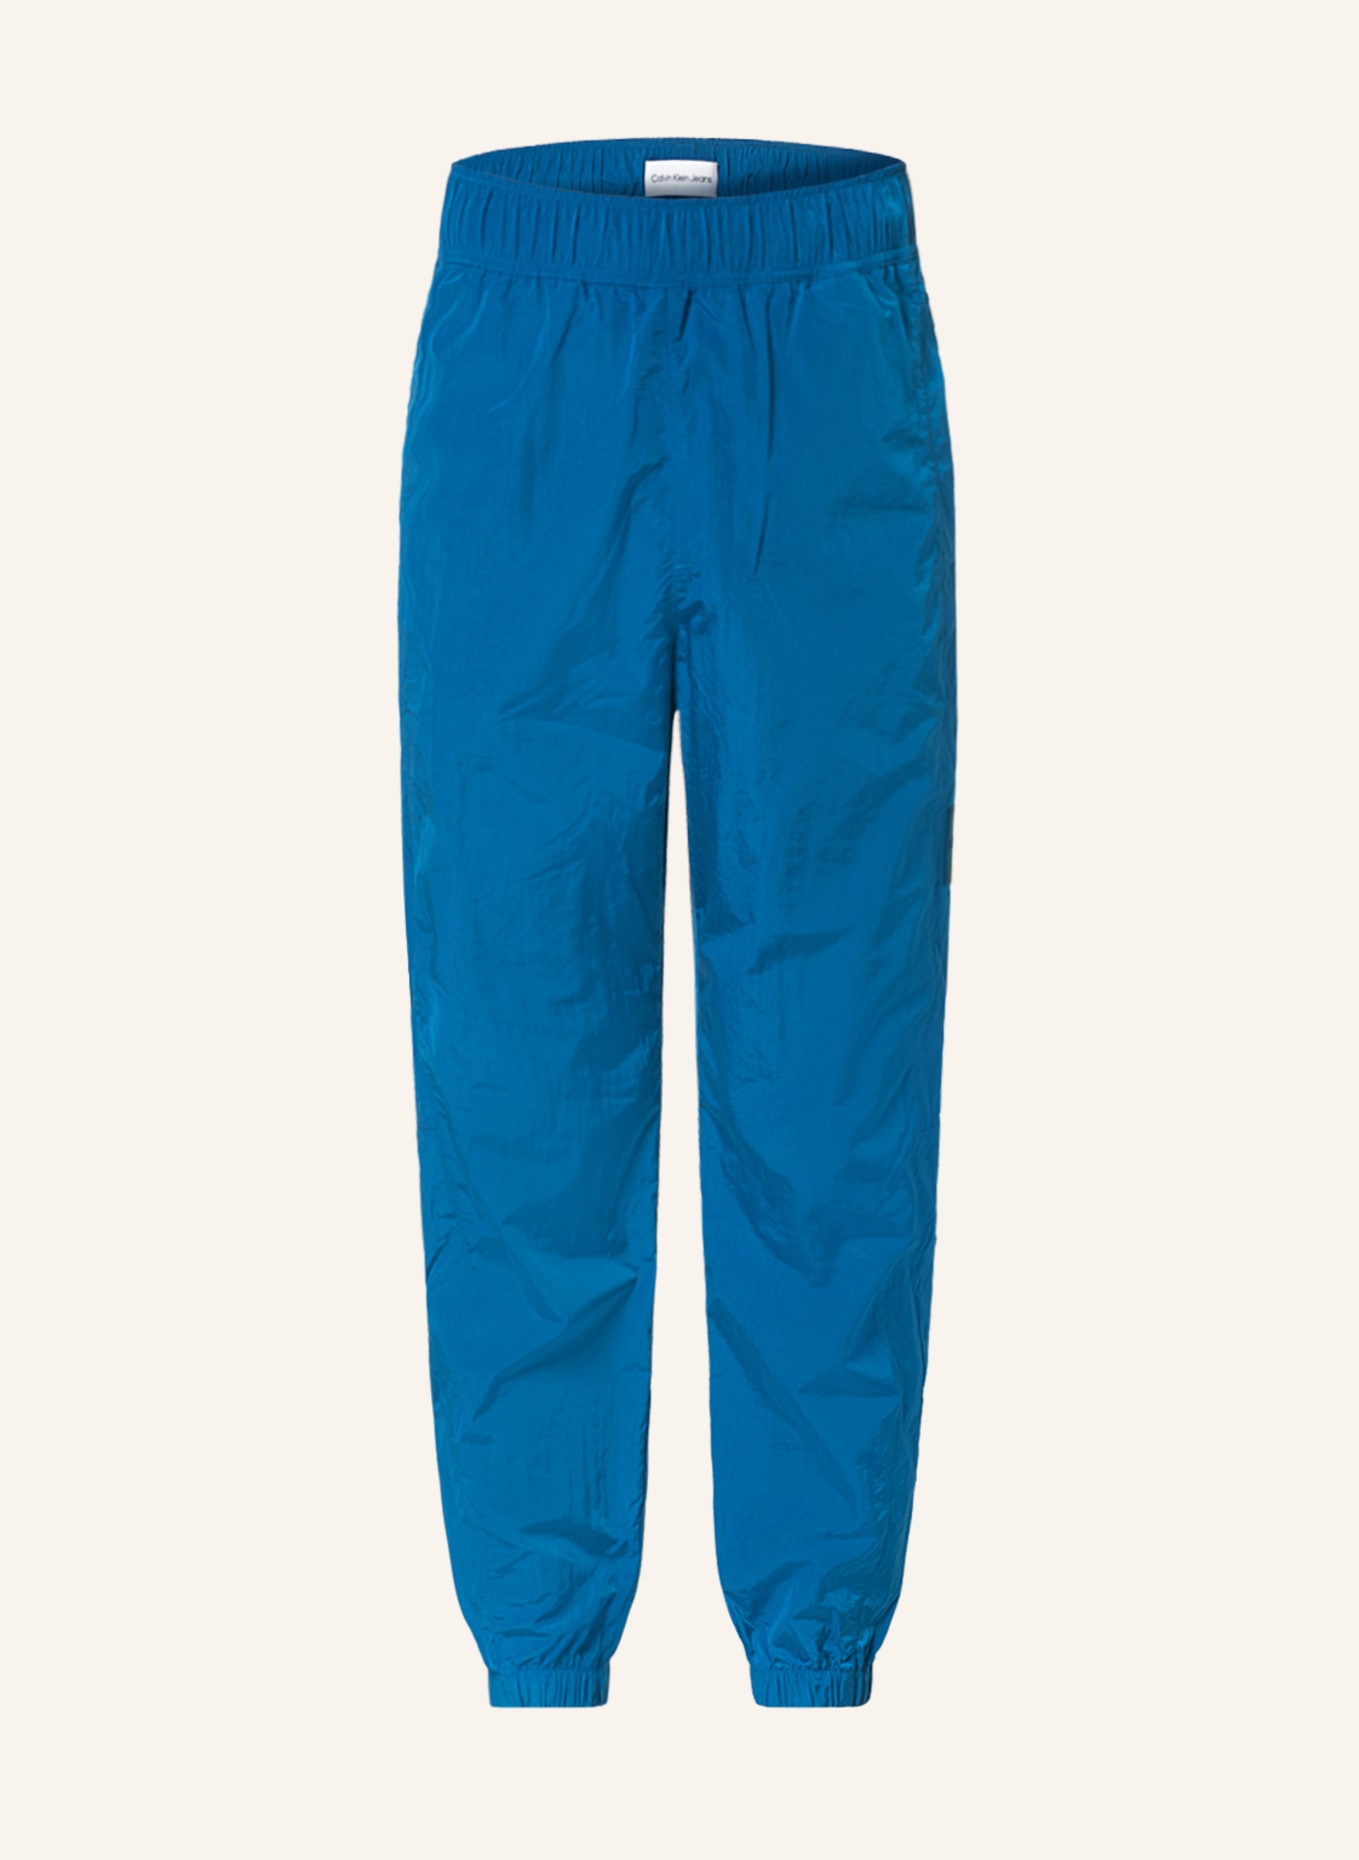 Buy Calvin Klein Calvin Klein Jeans Women Mid-Rise Track Pants at Redfynd